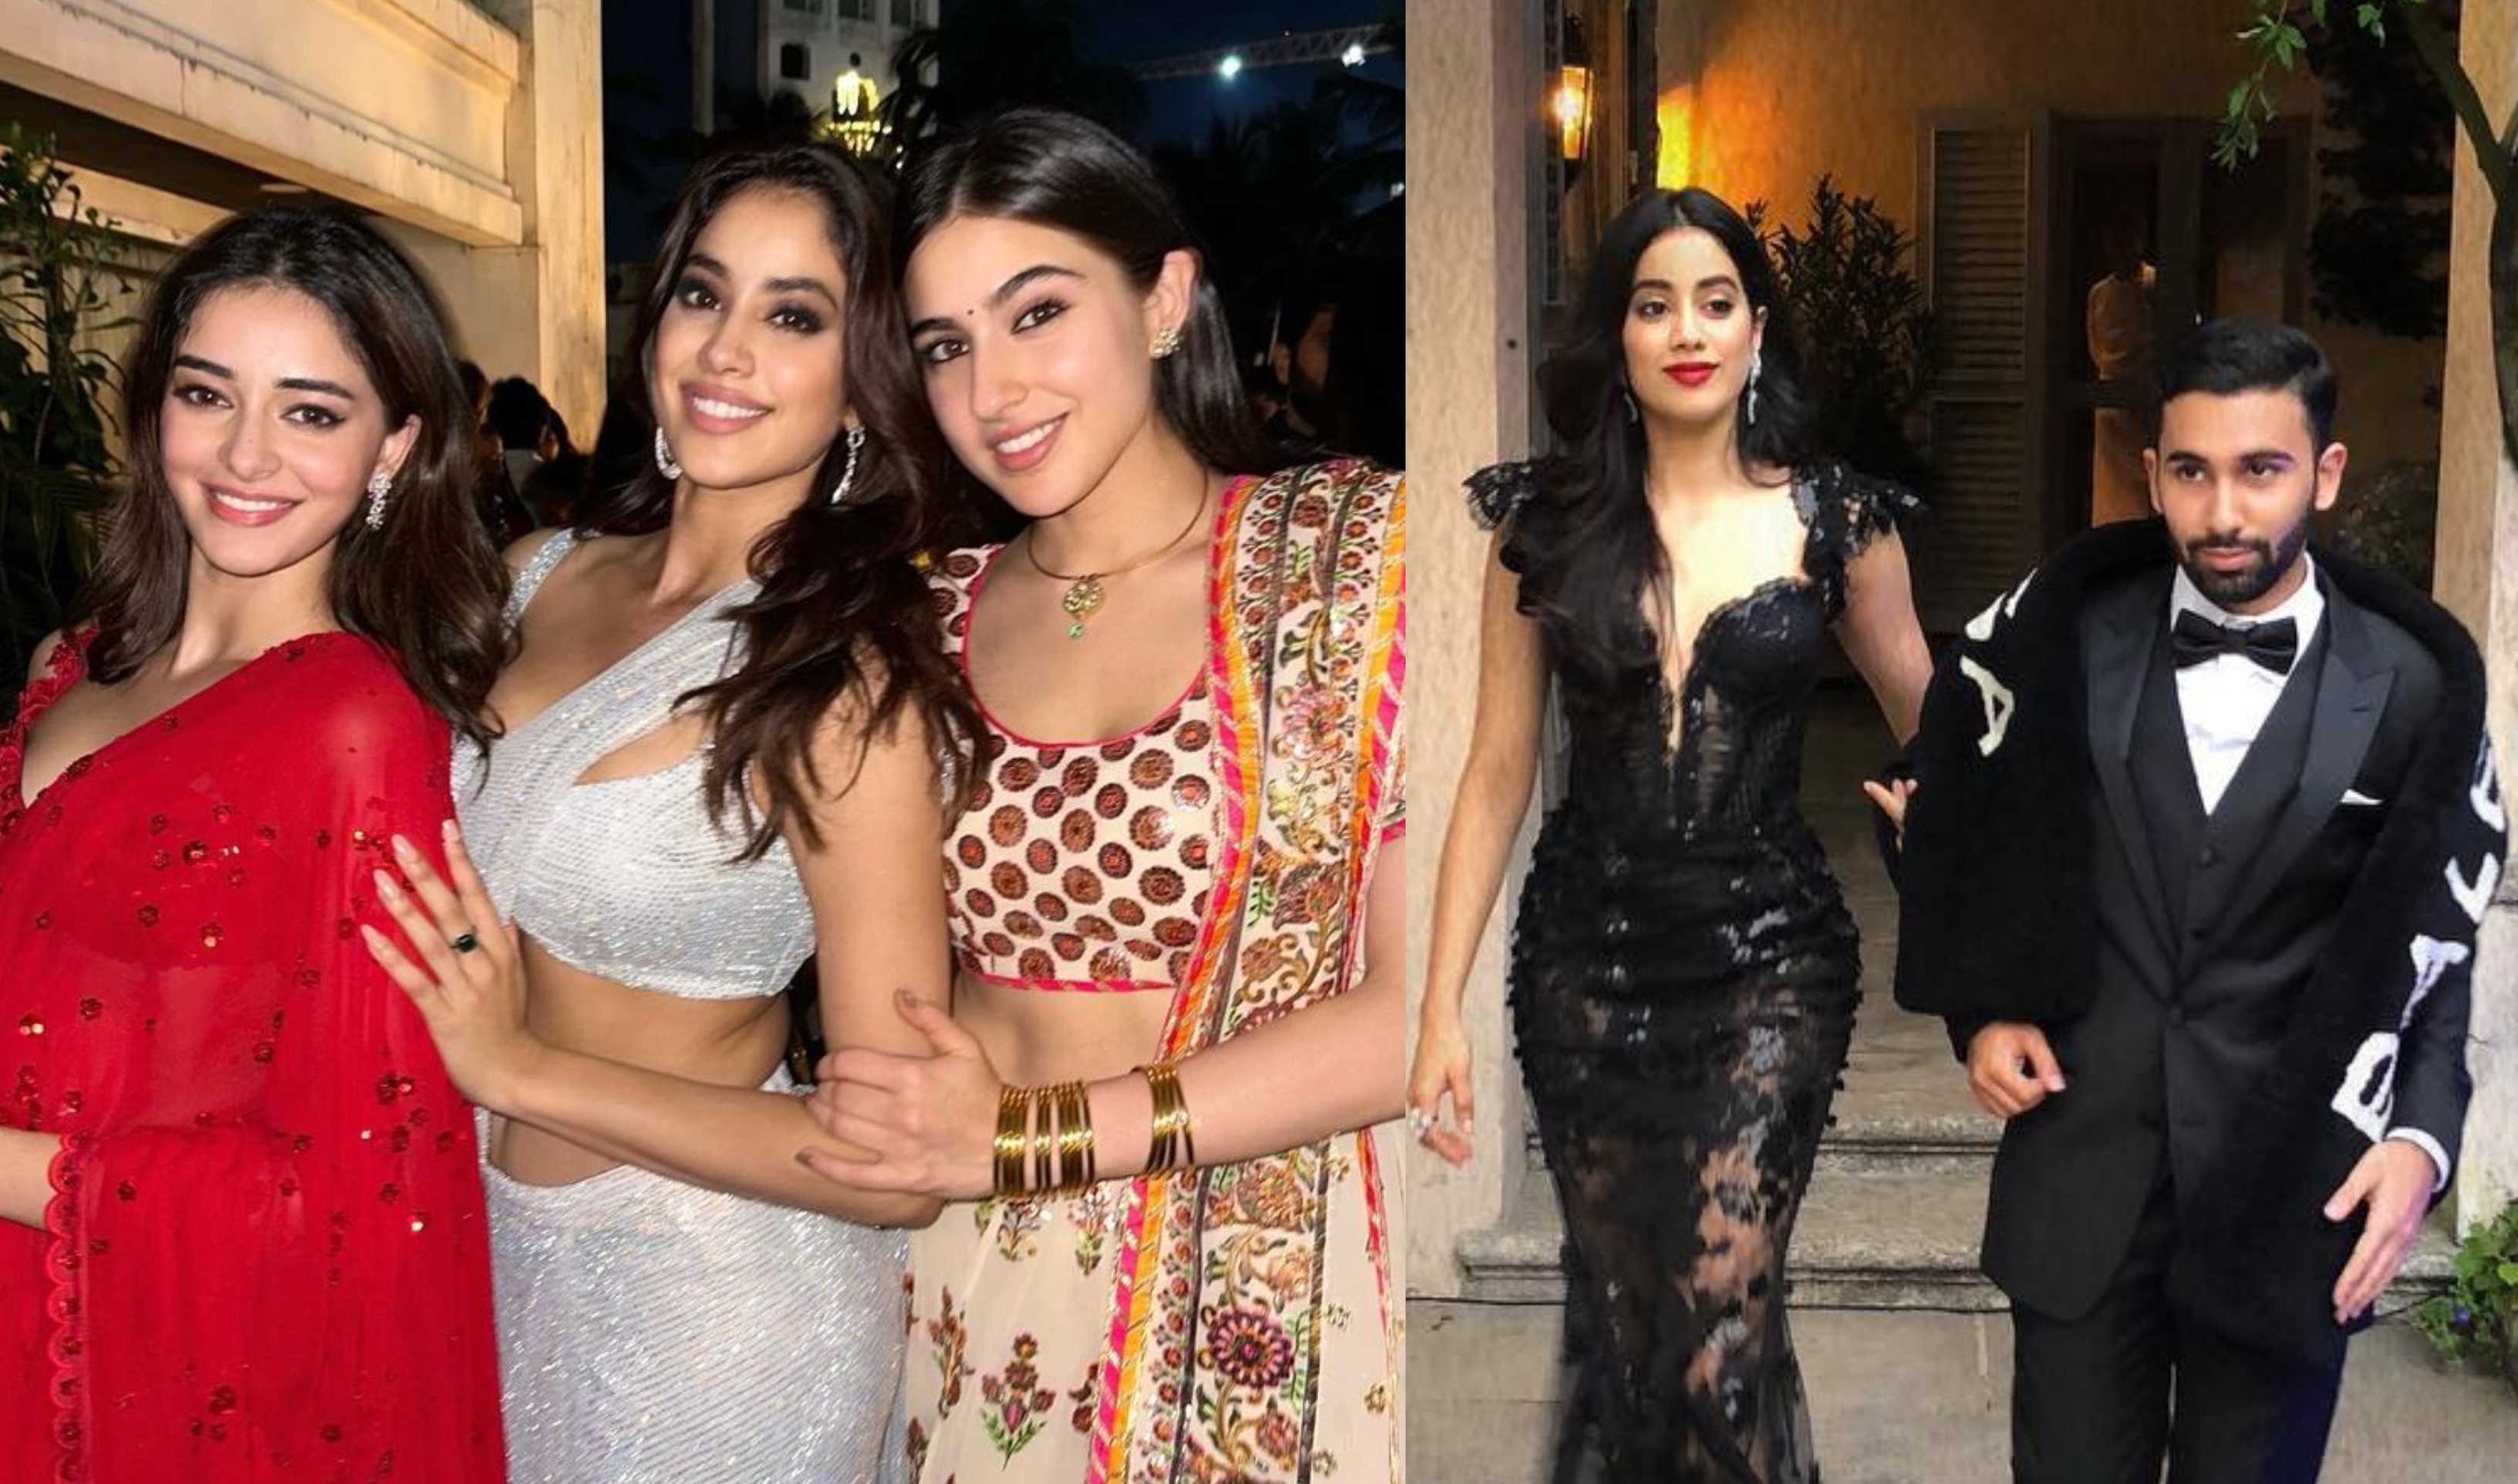 Ananya Panday and Sara Ali Khan share their honest review of Mili; here's what Janhvi Kapoor's rumored BF has to say